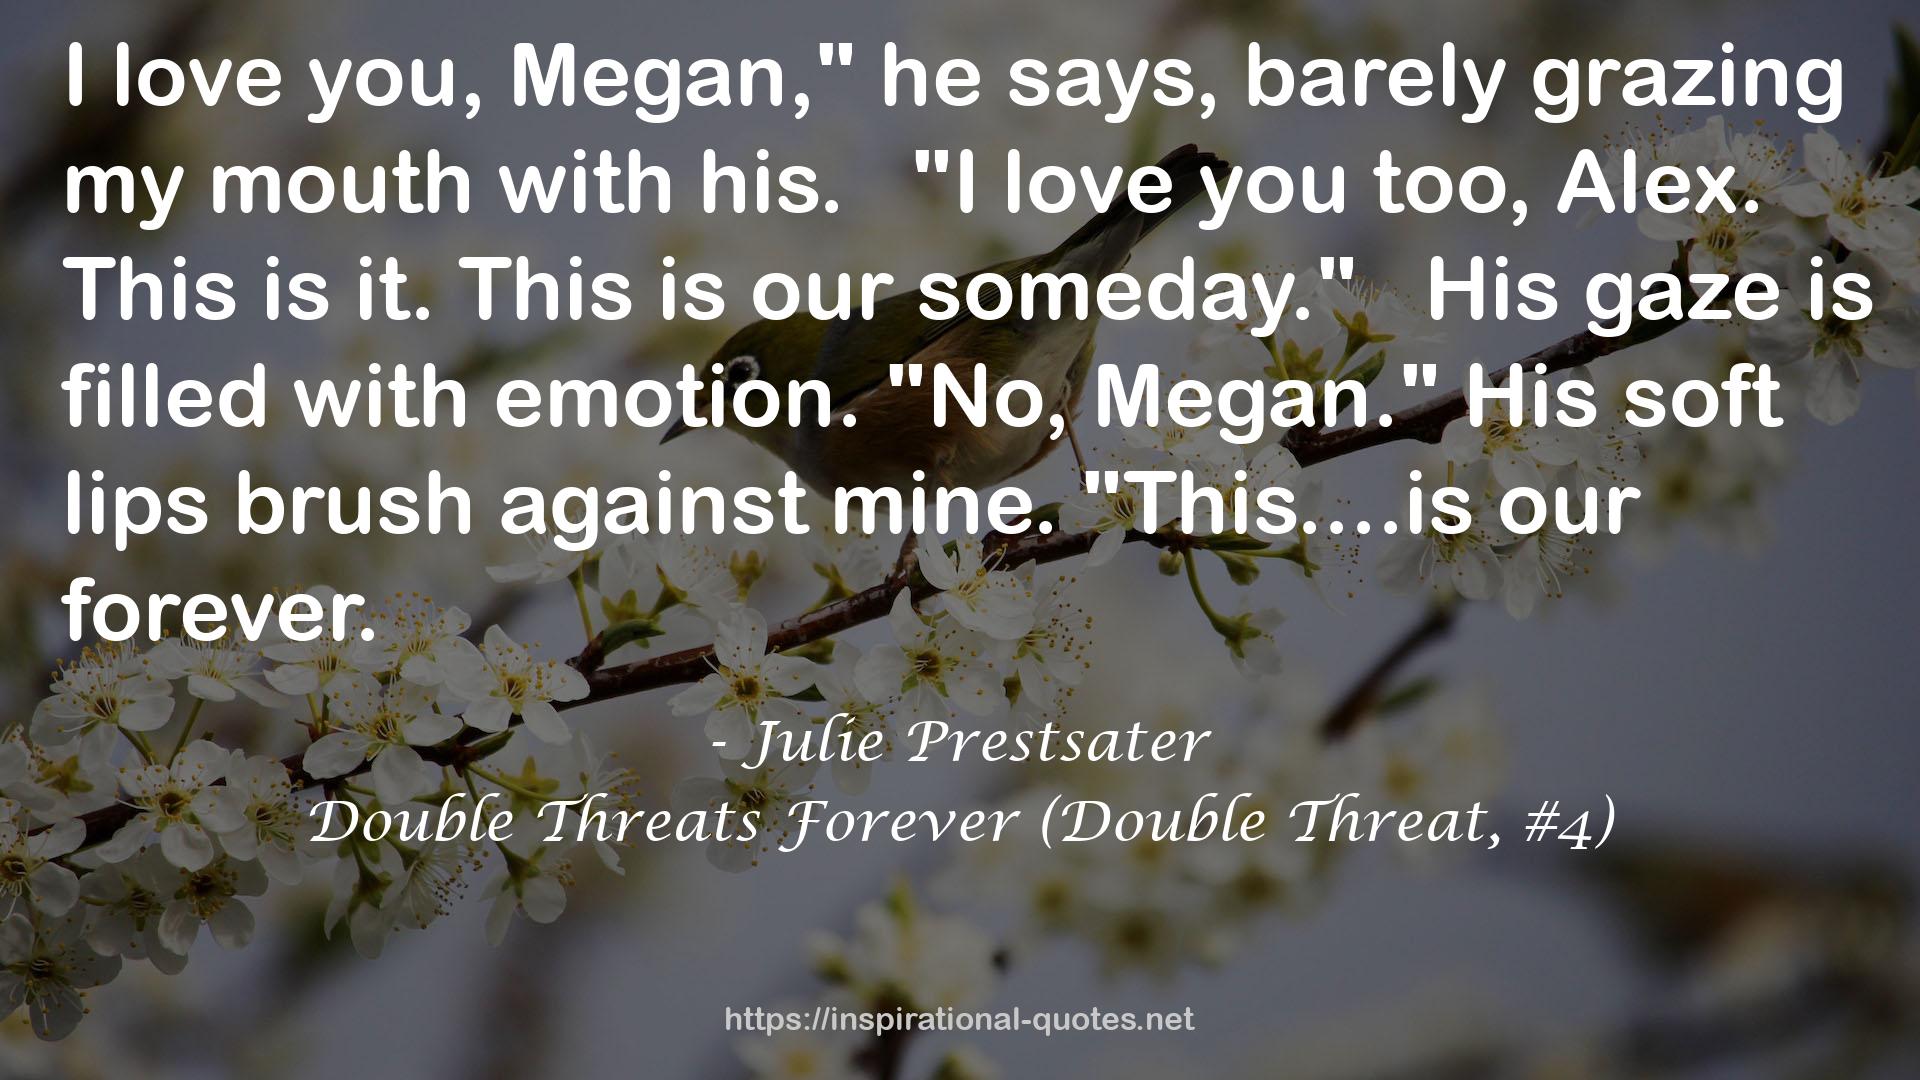 Double Threats Forever (Double Threat, #4) QUOTES